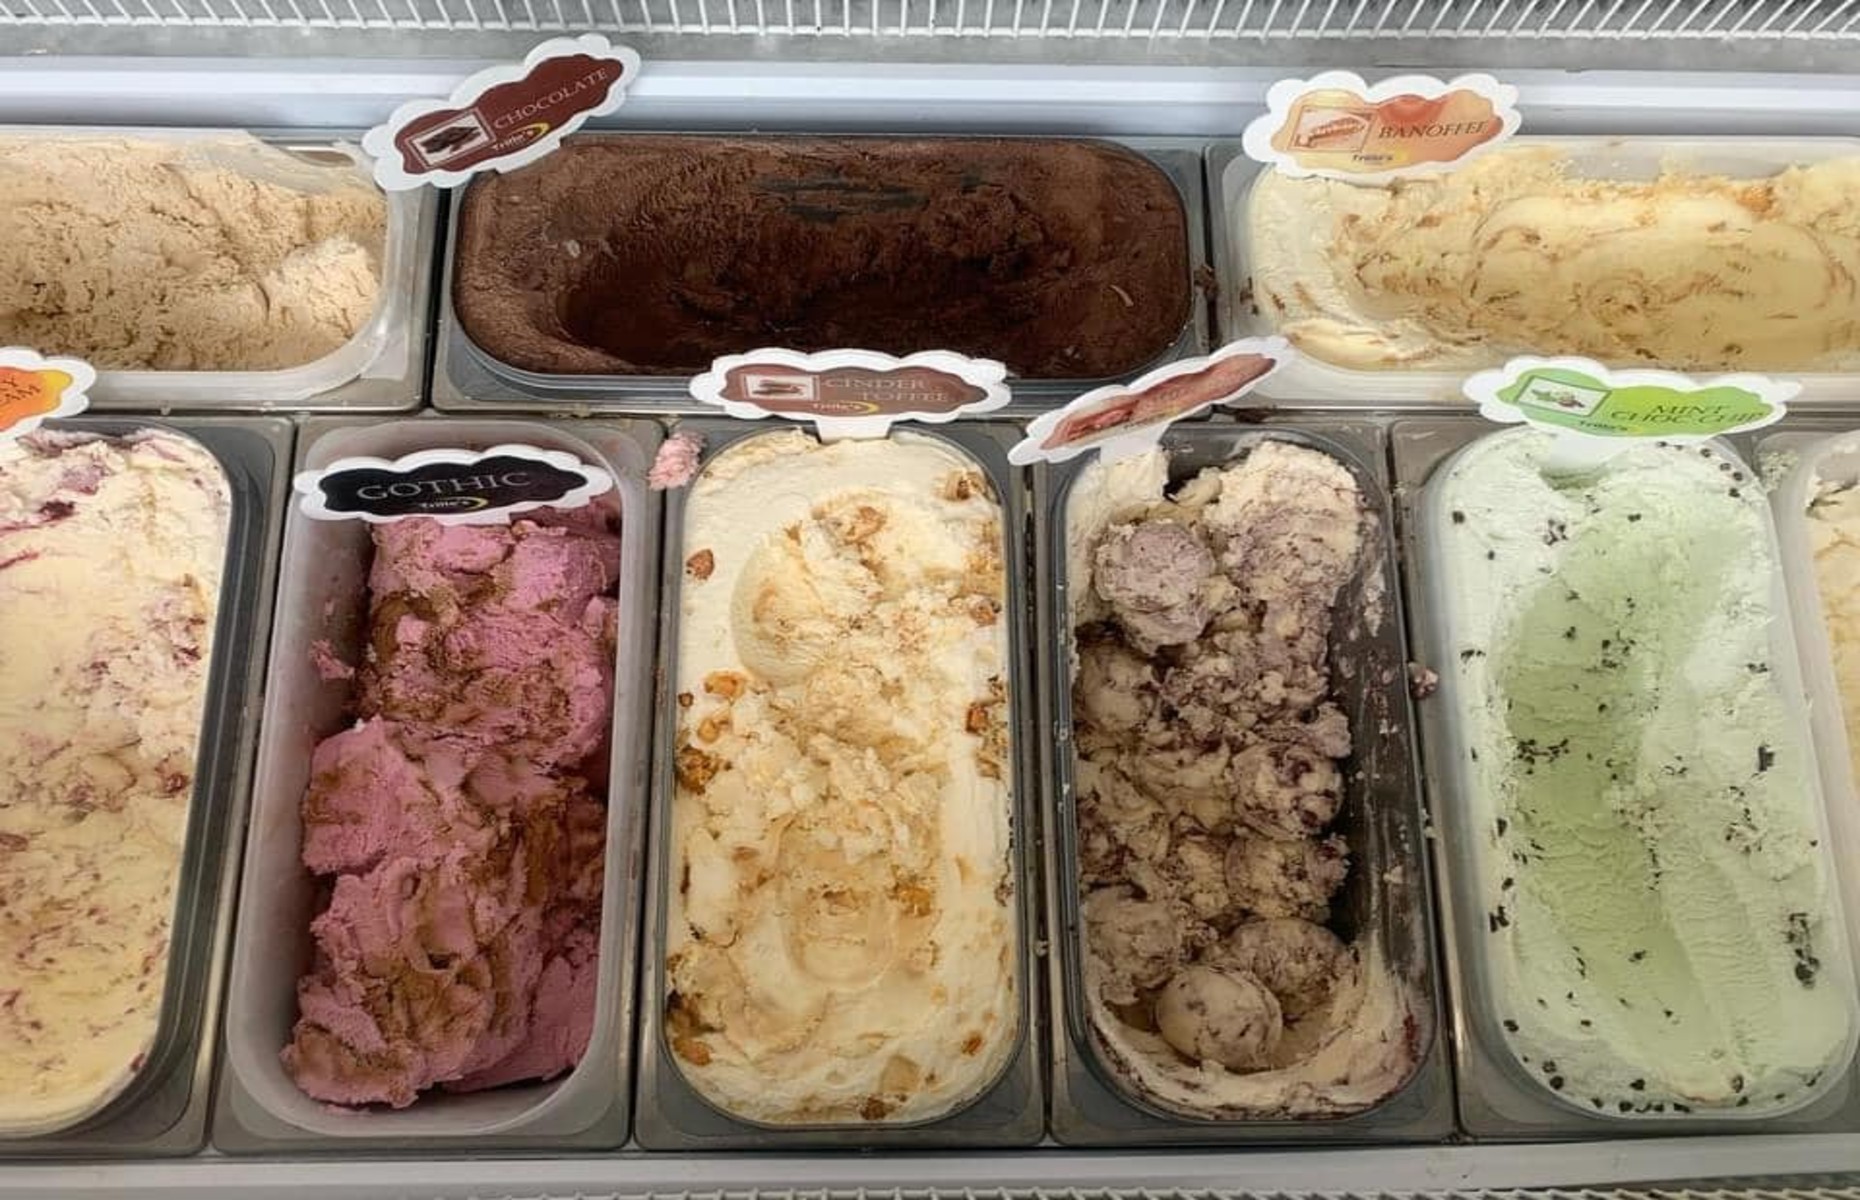 Ice cream flavours at Trillo's of Whitby (Image: The Dracula Experience/Facebook)